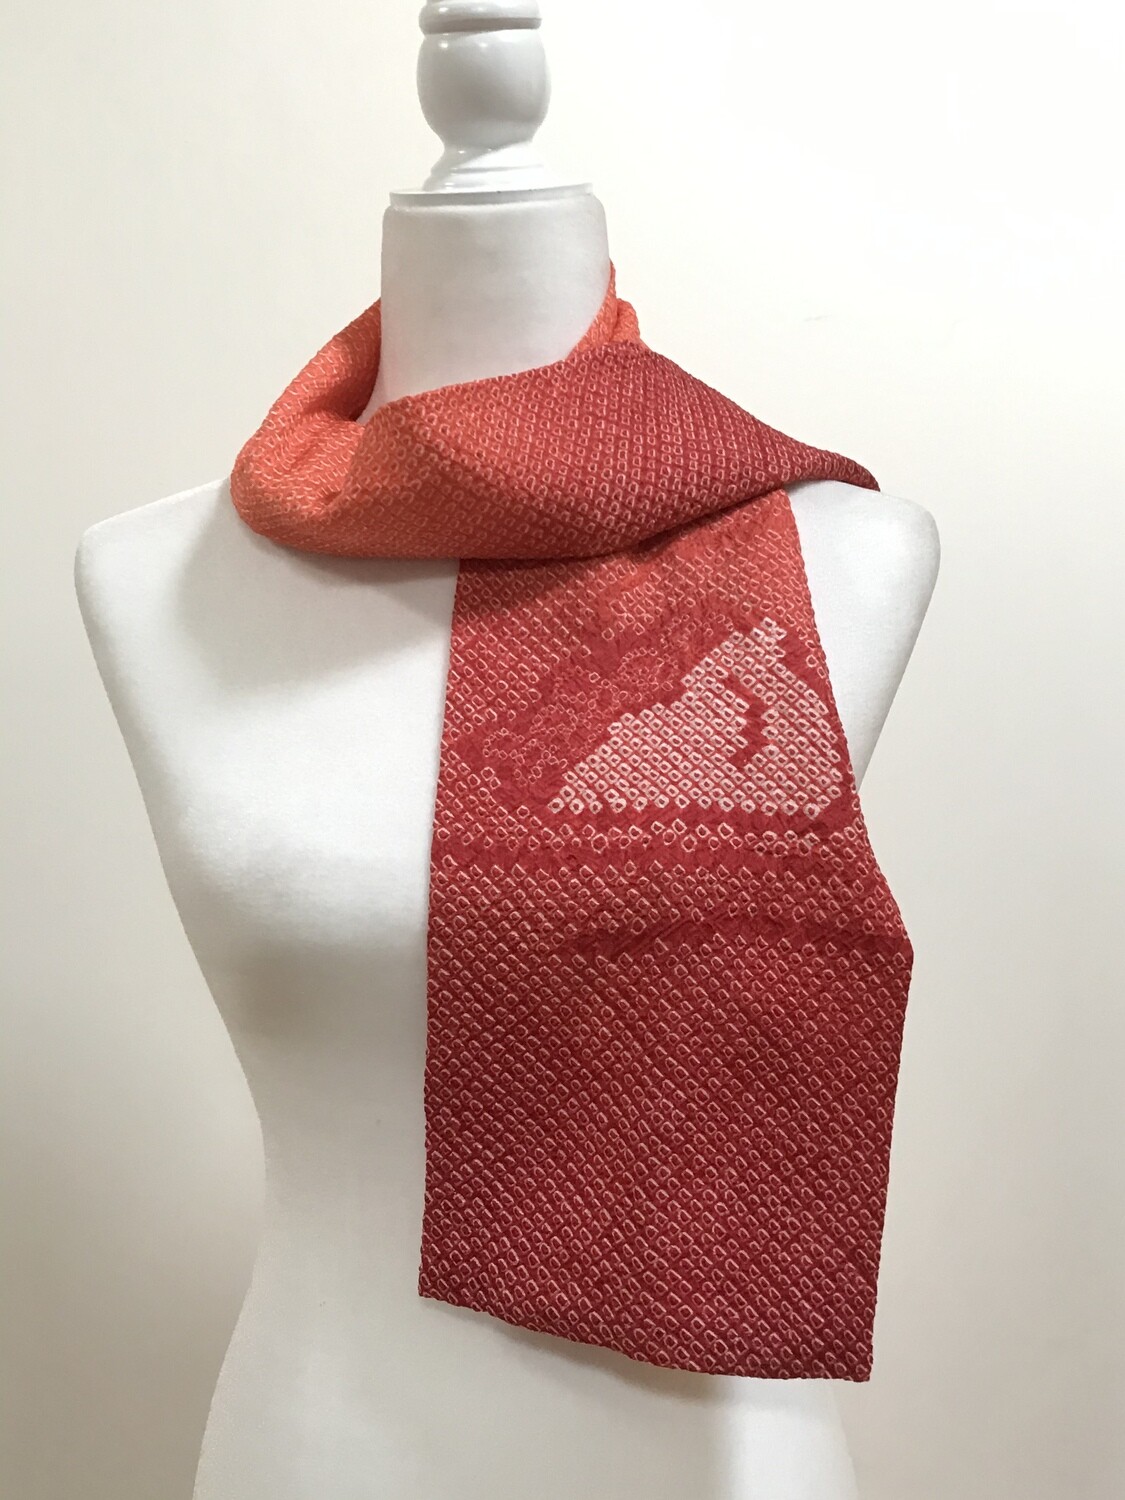 Scarf
 7 x 46in